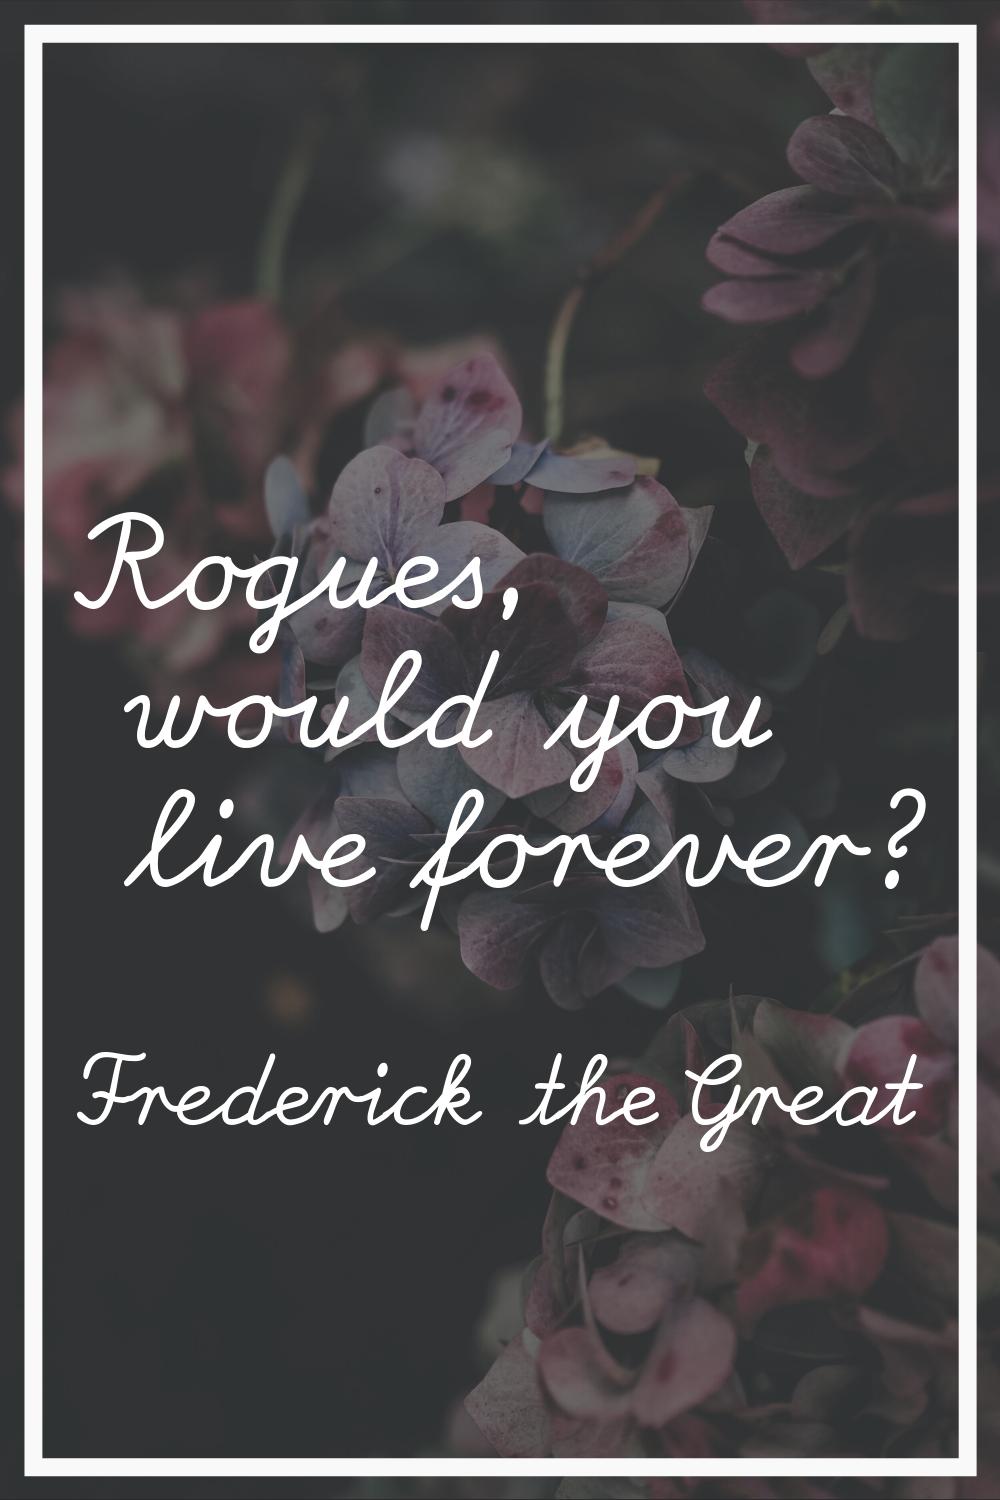 Rogues, would you live forever?